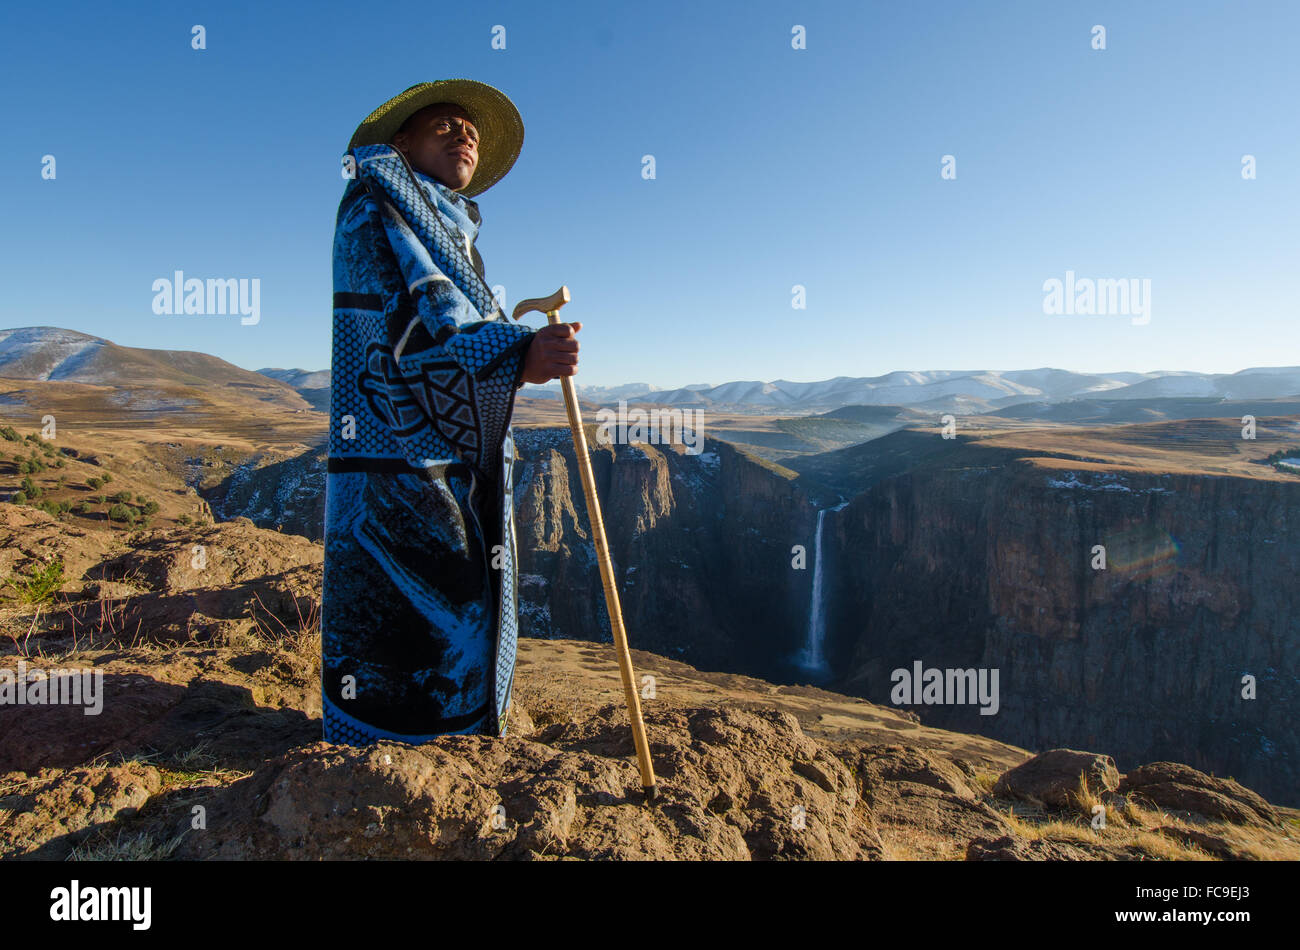 A local sheep shepherd converges on the cliffs of Maletsunyane Falls in rural Lesotho. Stock Photo